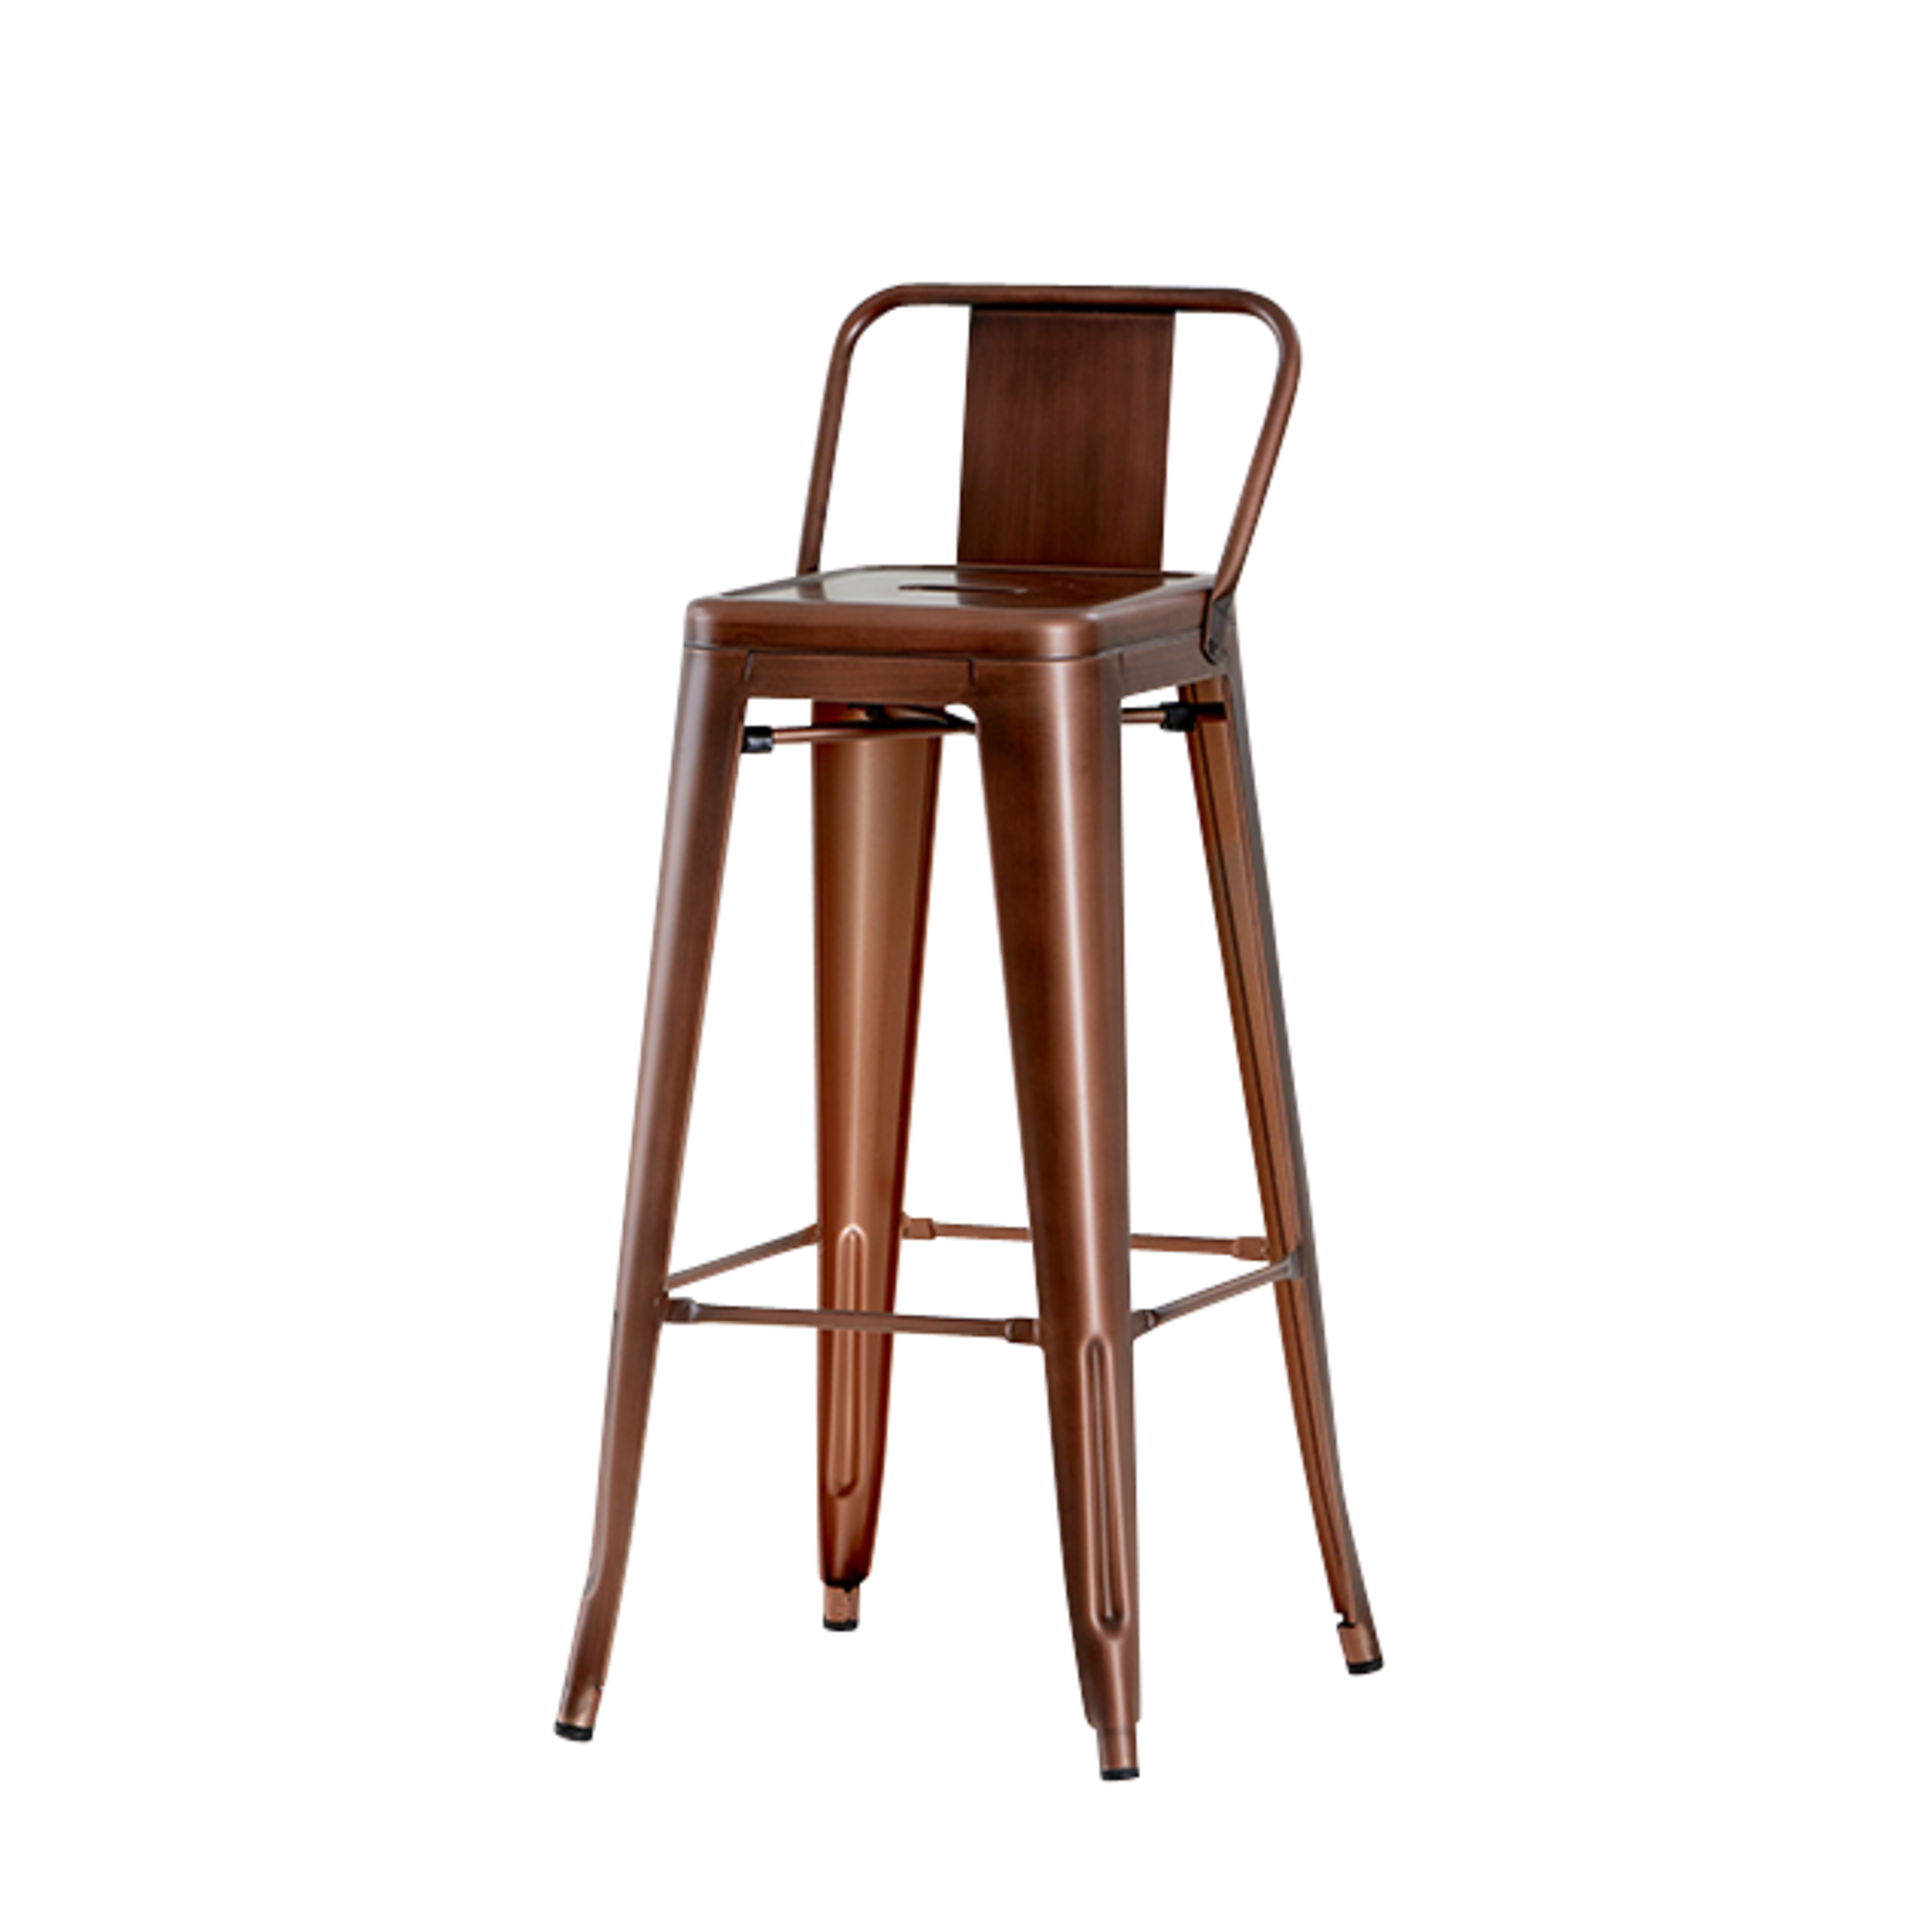 4 x Industrial Tolix Style Stackable Bar Stools With Backrests - Finish: COPPER - Ideal For Bistros,